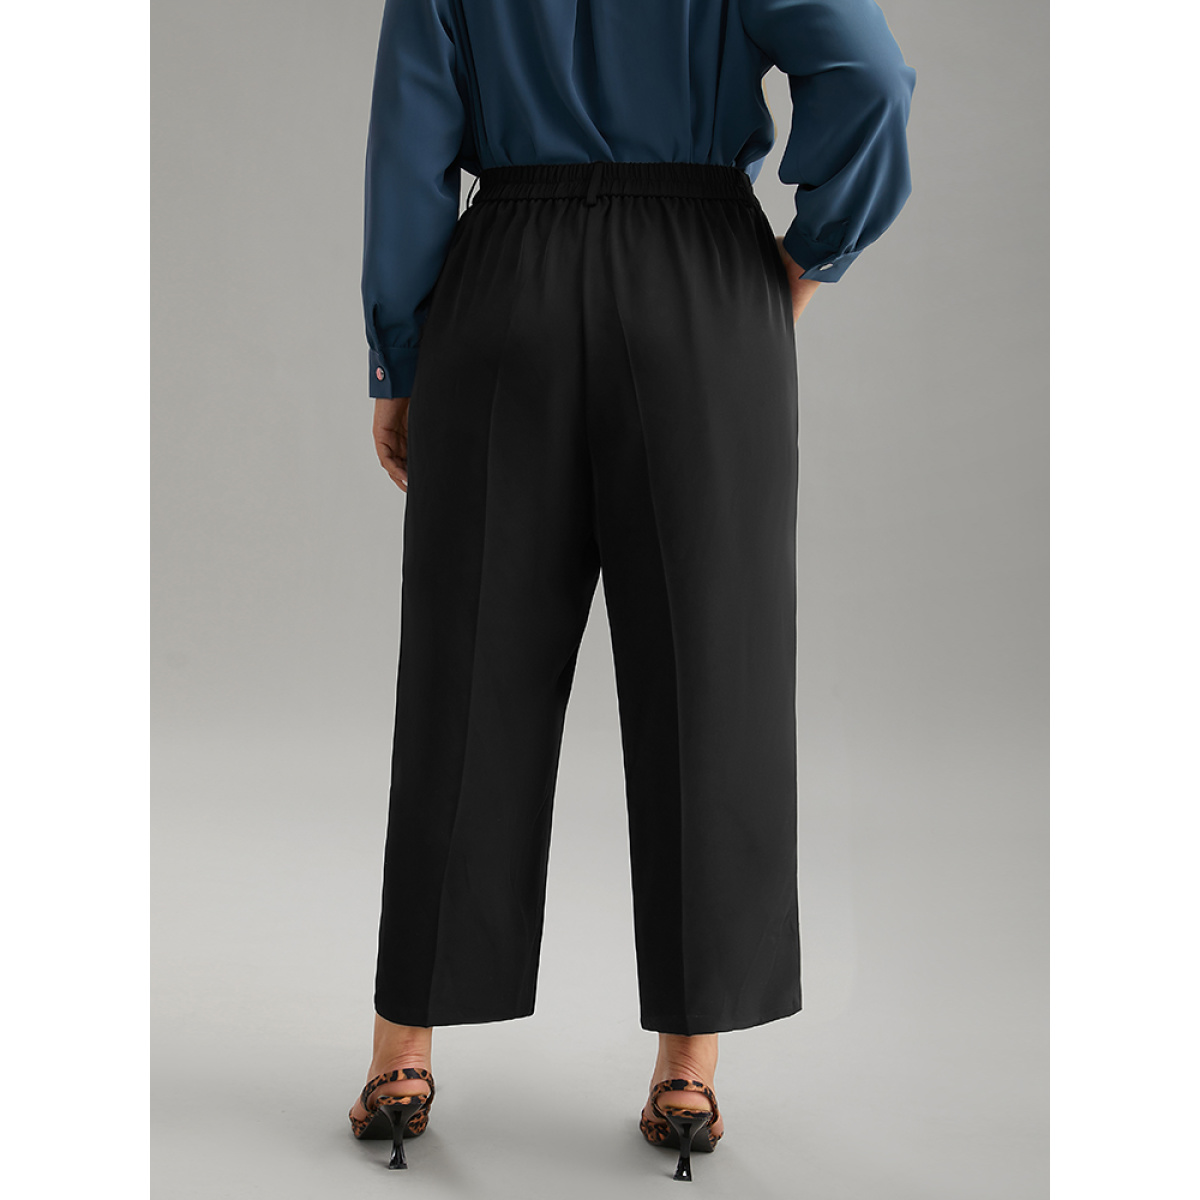 

Plus Size Static-Free Solid Seam Detail Button Up Pants Women Black Office Straight Leg High Rise Work Pants BloomChic